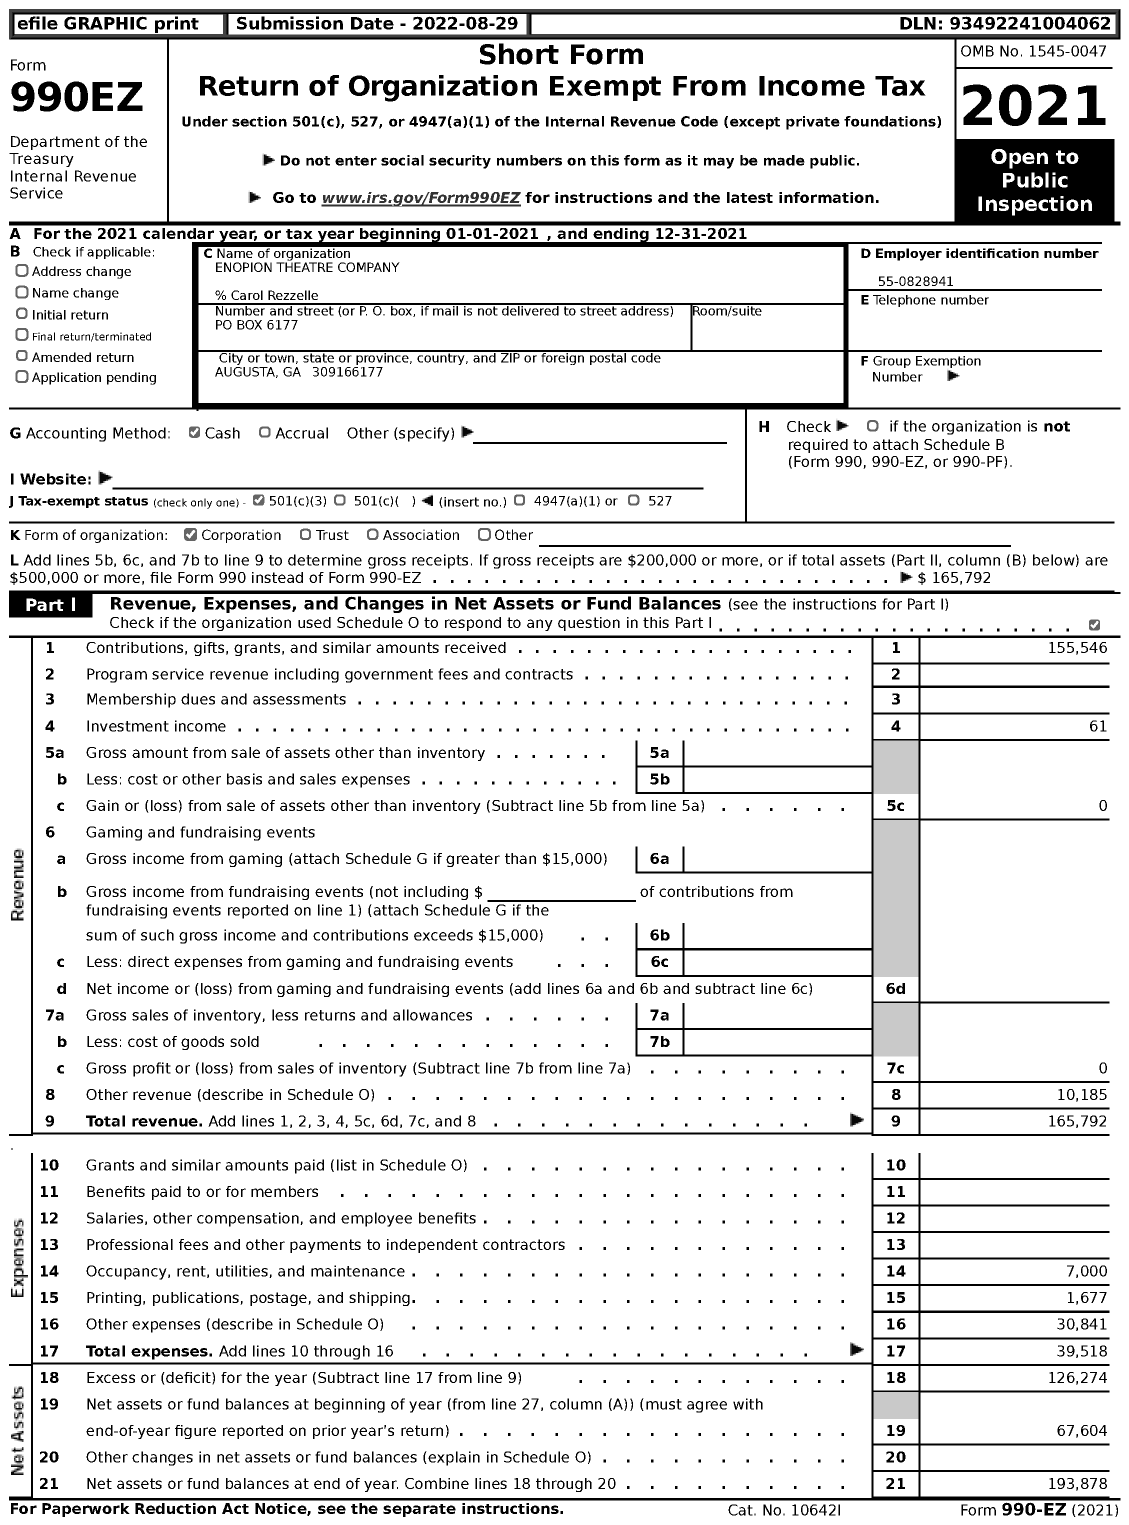 Image of first page of 2021 Form 990EZ for Enopion Theatre Company